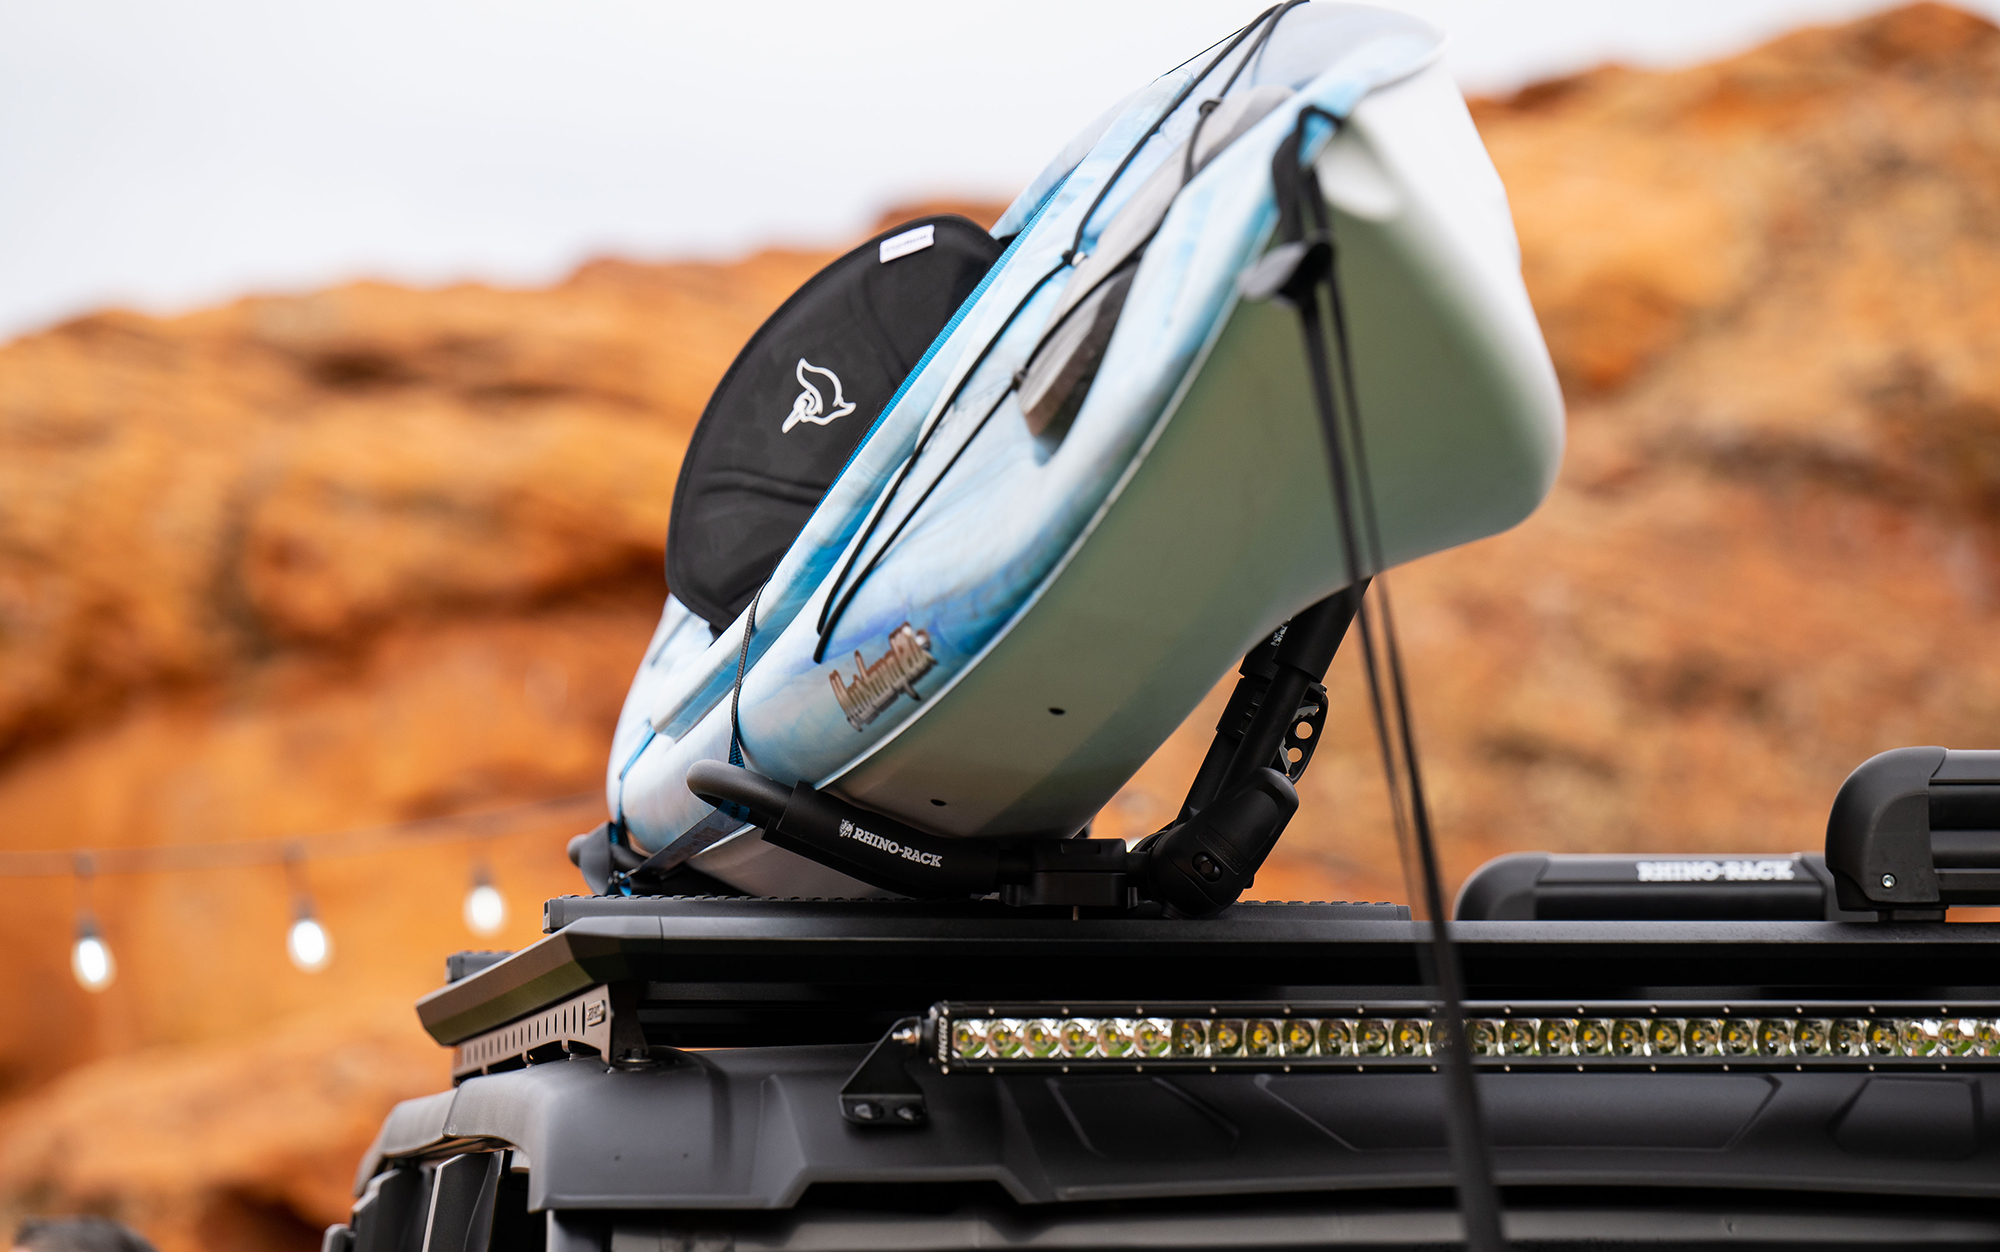 Polaris partnered with Rhino-Rack to bring a line of modular accessories to the Xpedition series.